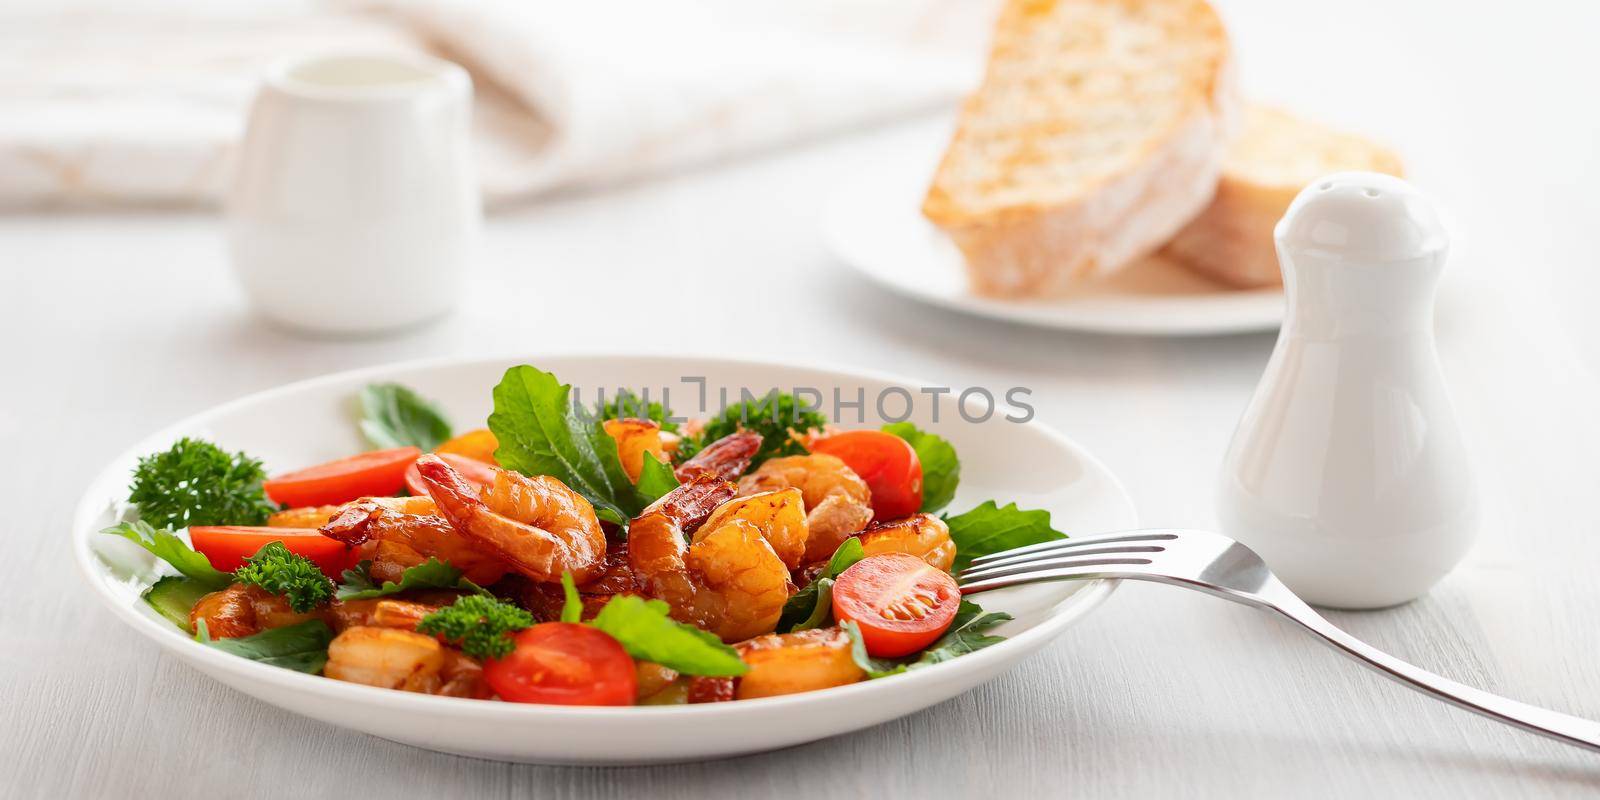 Fresh salad of shrimps, tomatoes, arugula and herbs on a white plate.